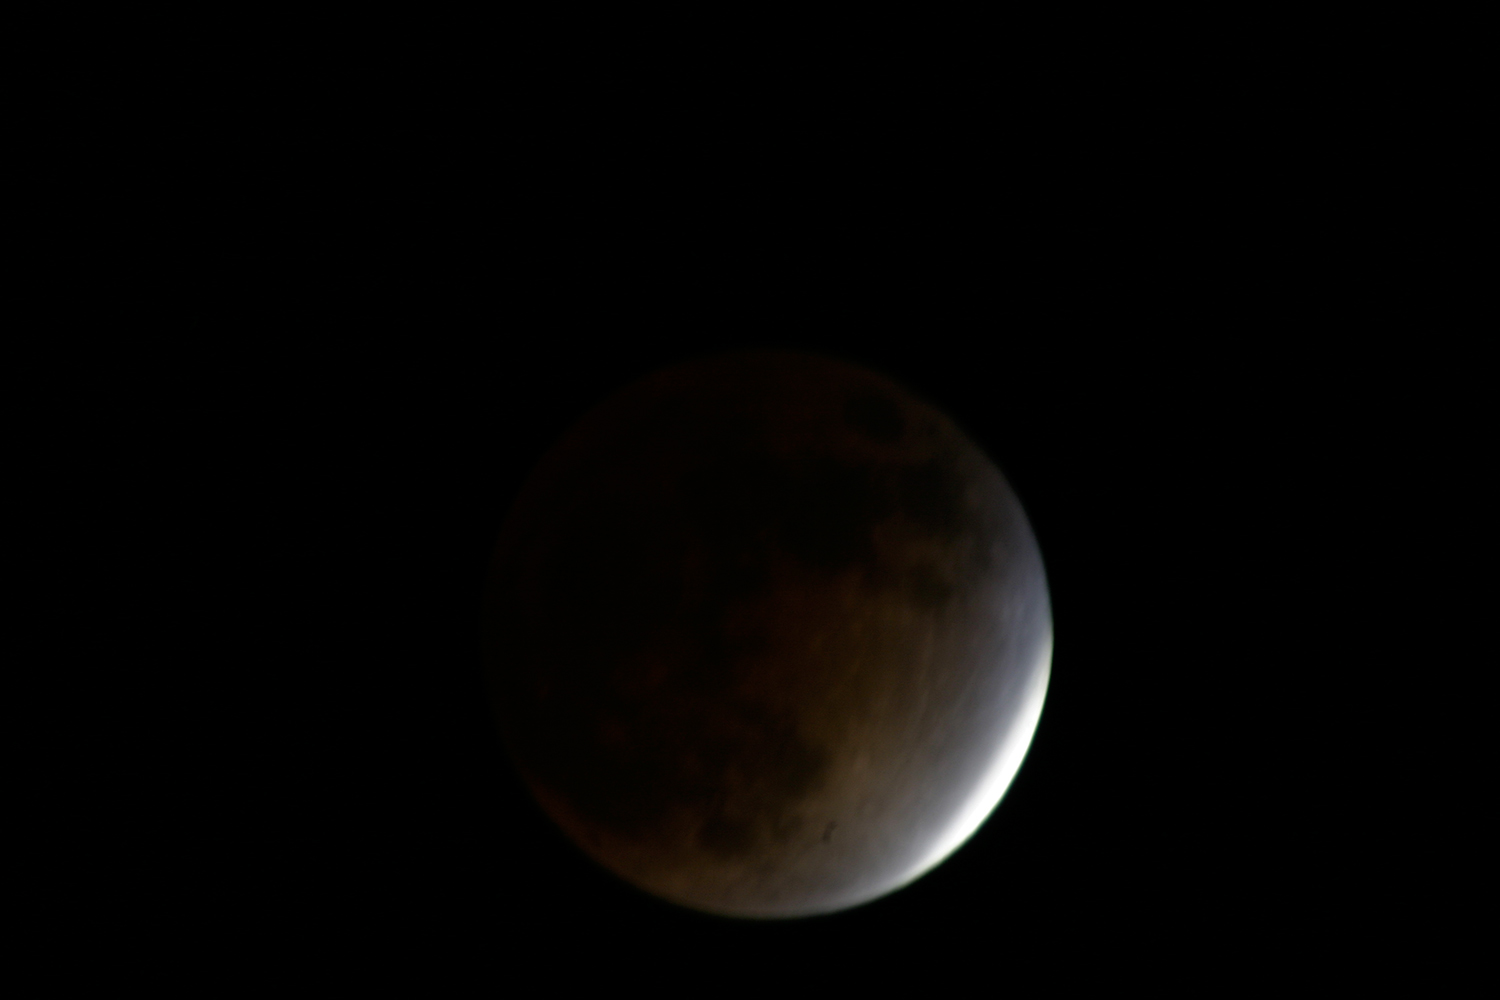 Blurry terrible photo of a Lunar Eclipse in 2003